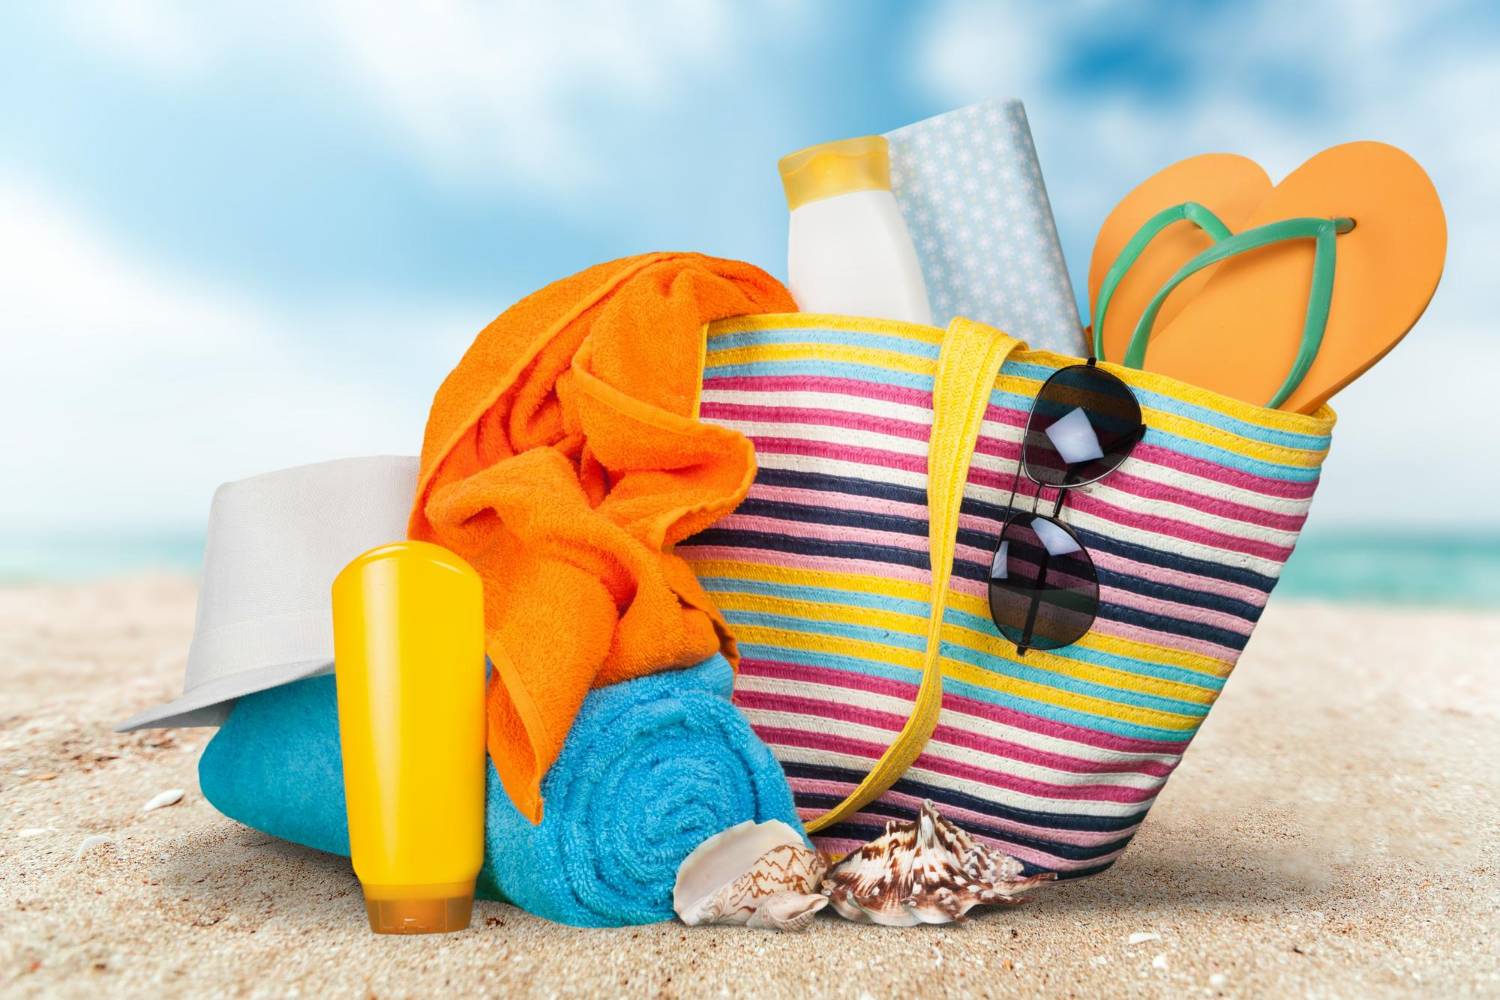 Beach bag with towels, sunscreen, and flip-flops on the sand.